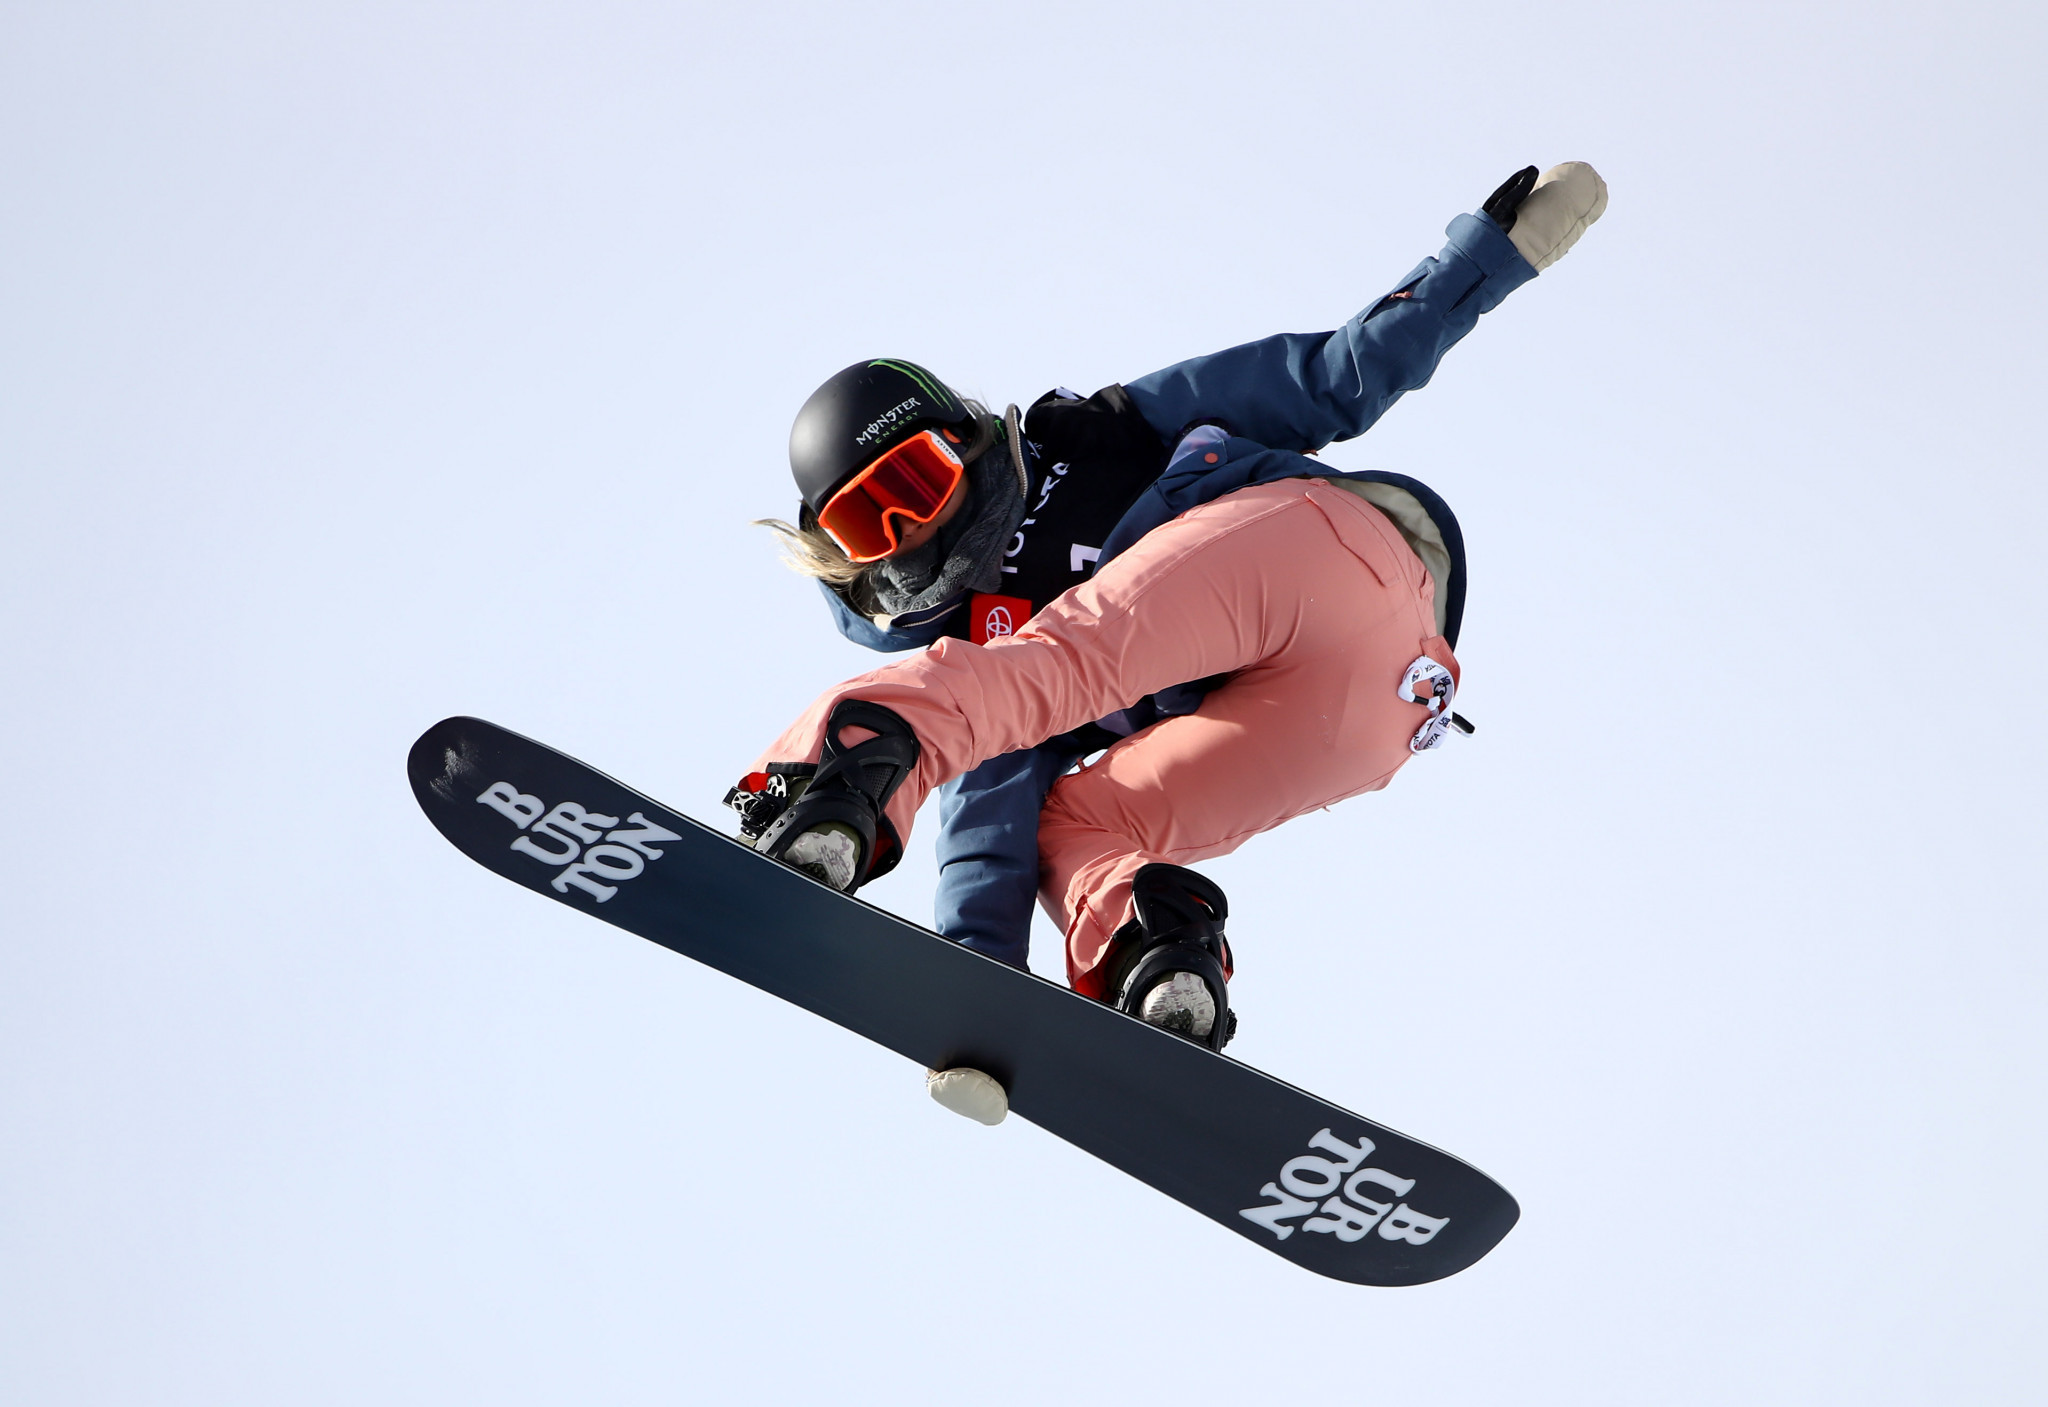 Kim adds to growing collection of titles with halfpipe victory at Freestyle Ski and Snowboard World Championships